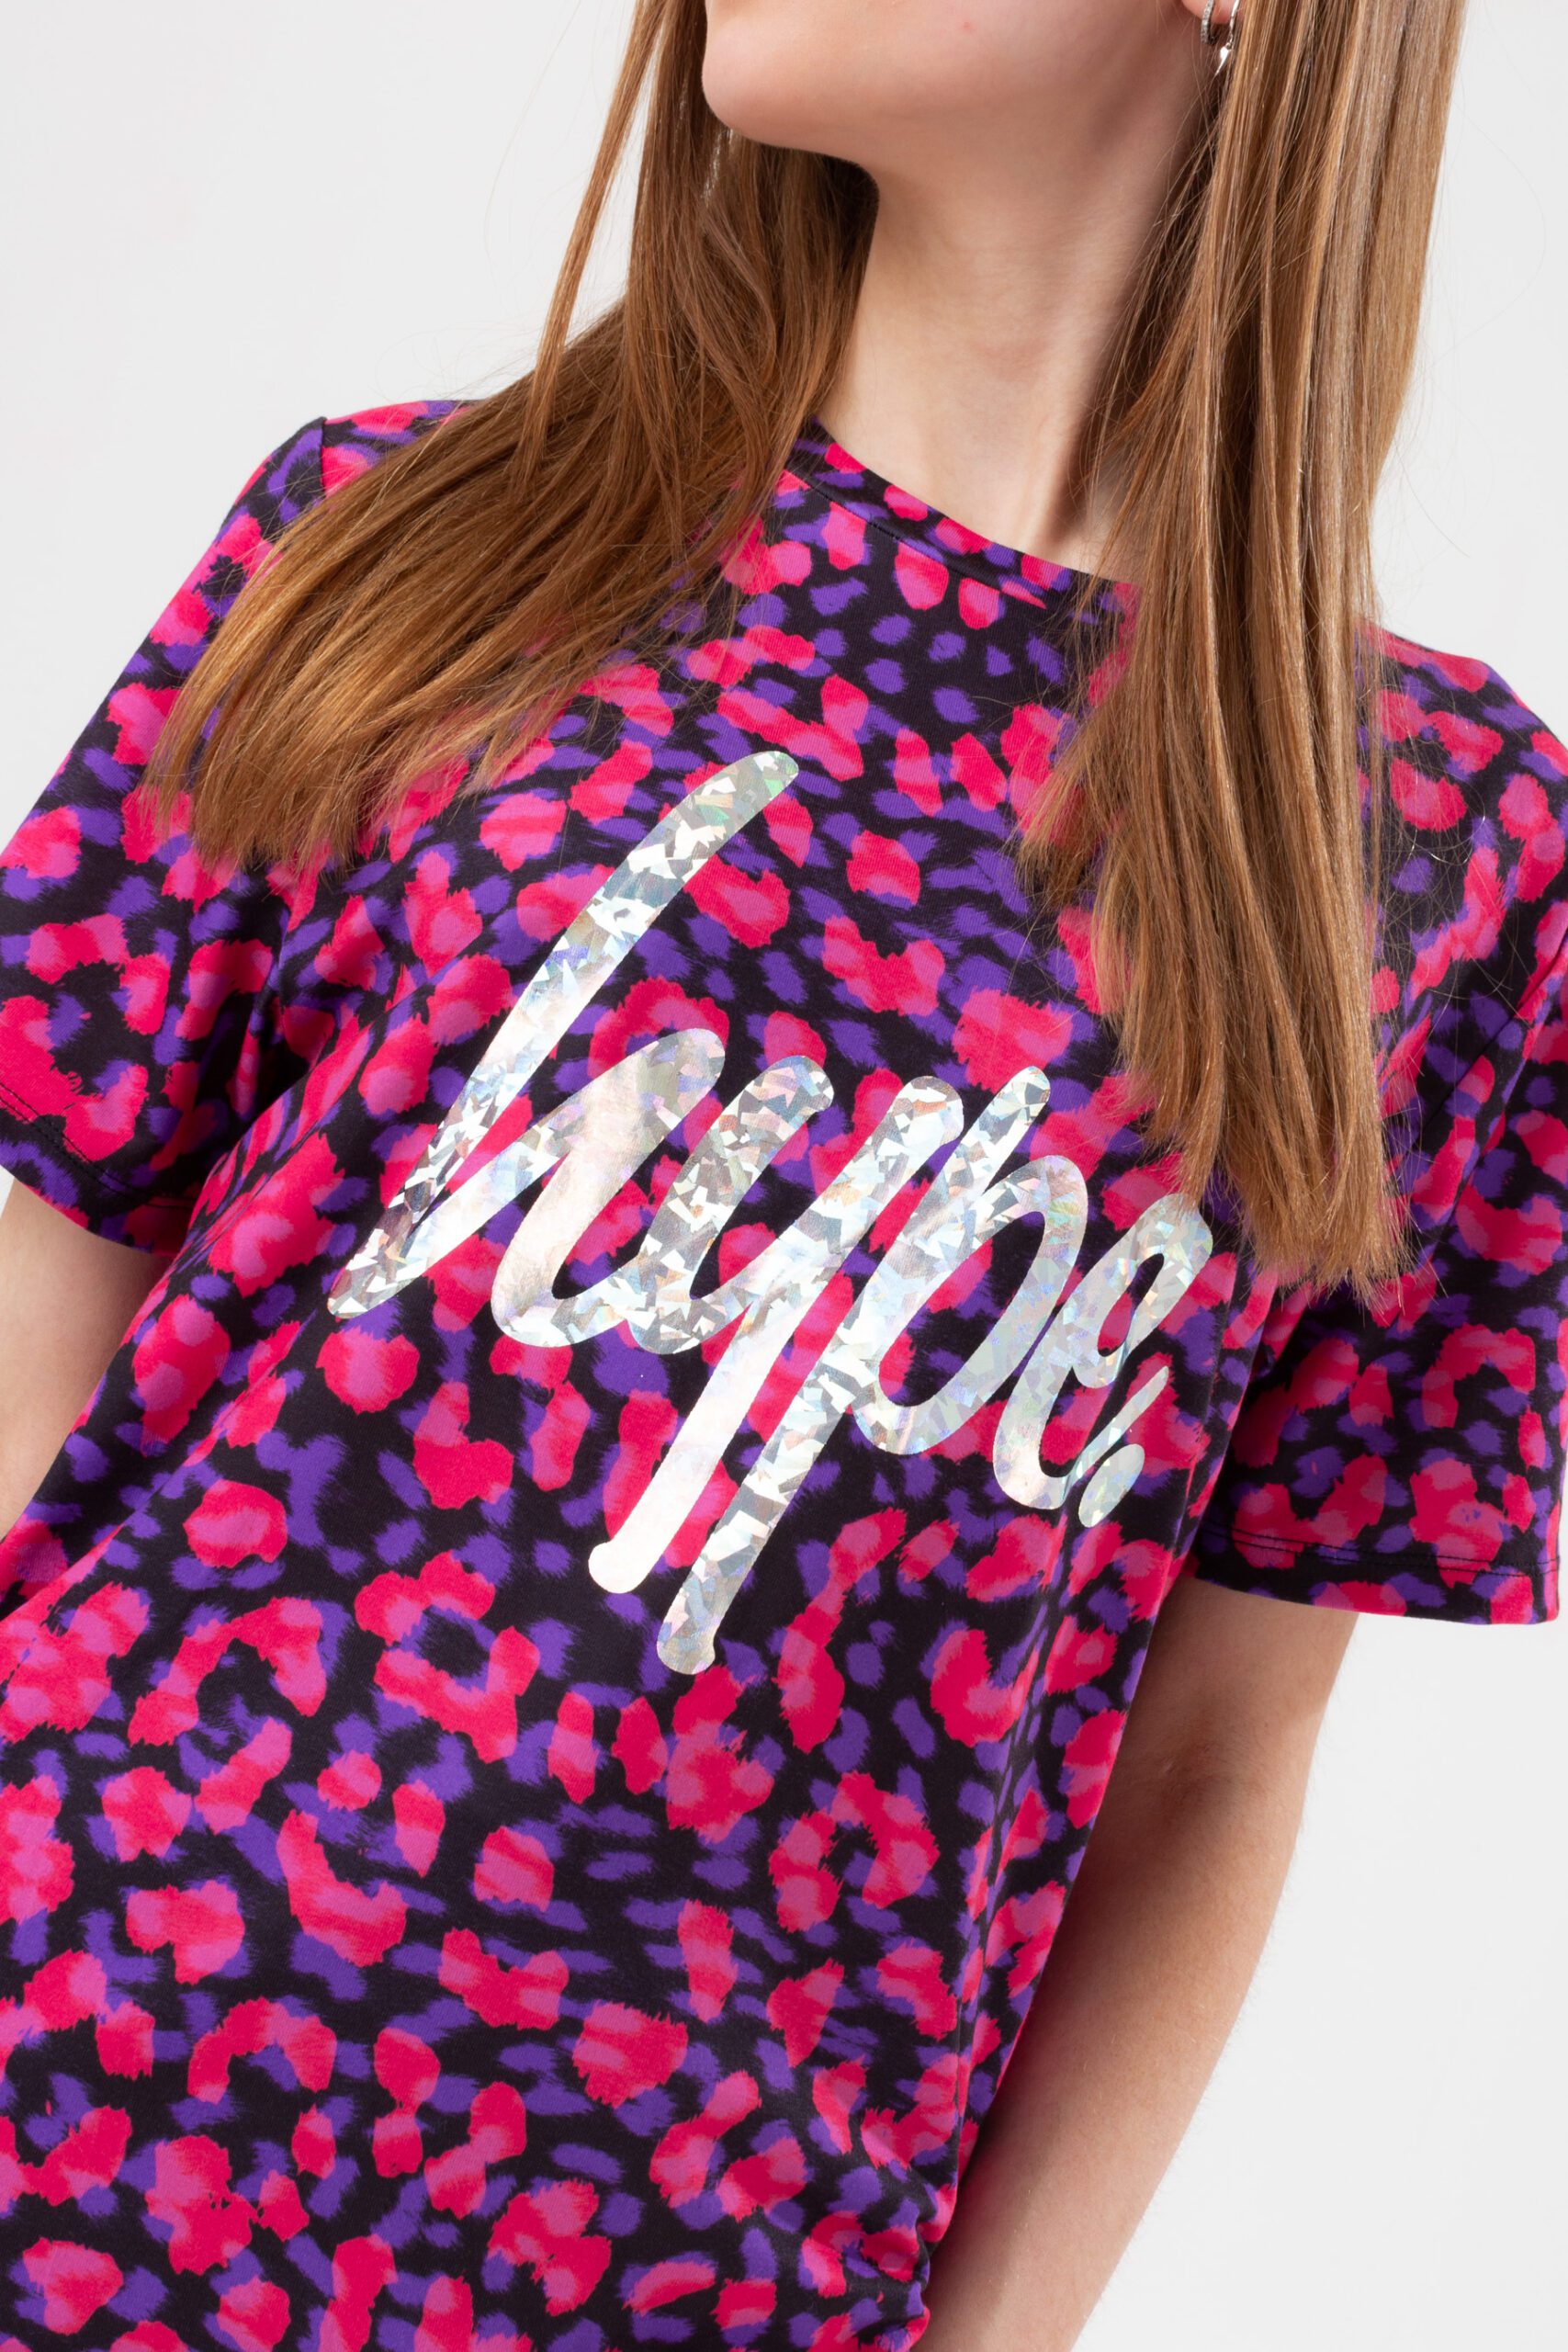 girls hype leopard print pink and purple tshirt close up